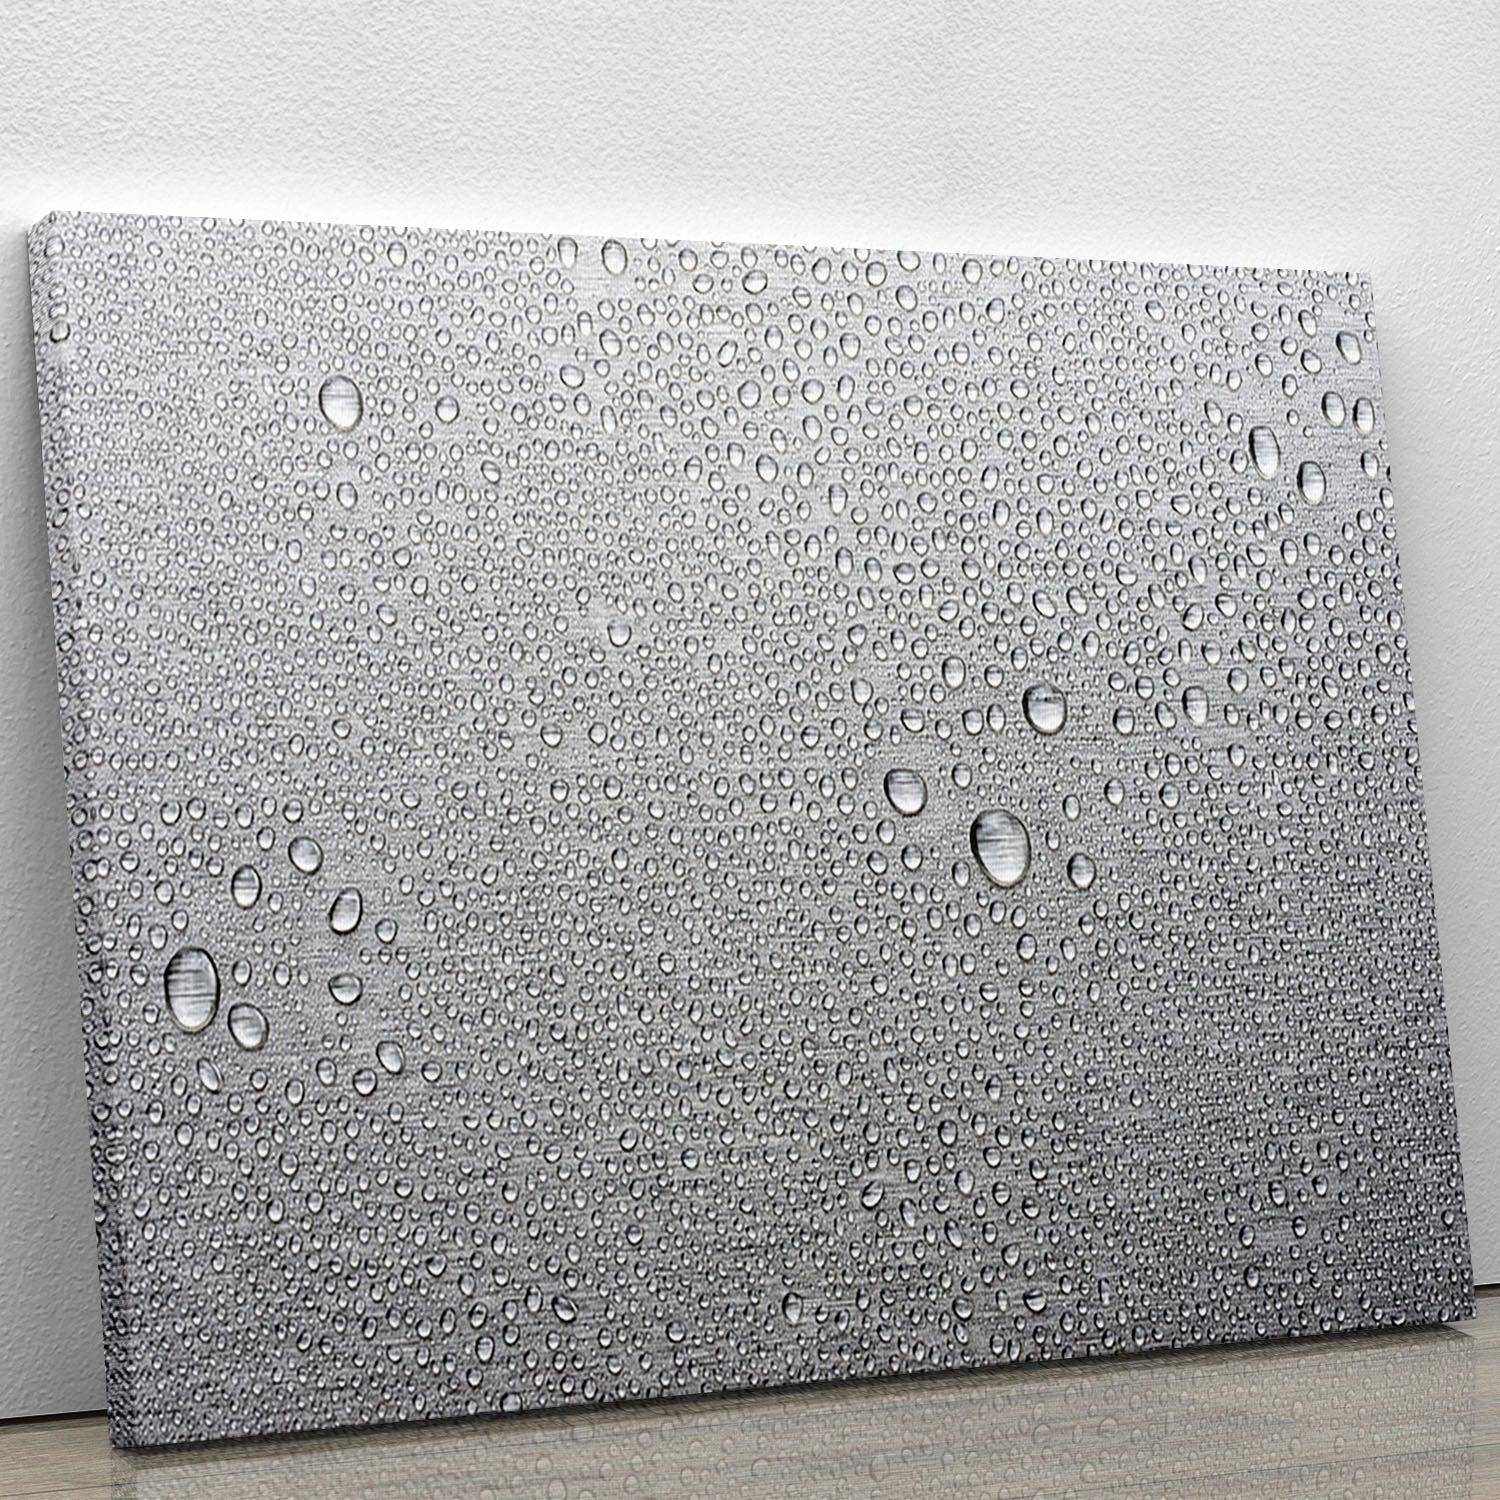 Brushed metal surface with water Canvas Print or Poster - Canvas Art Rocks - 1